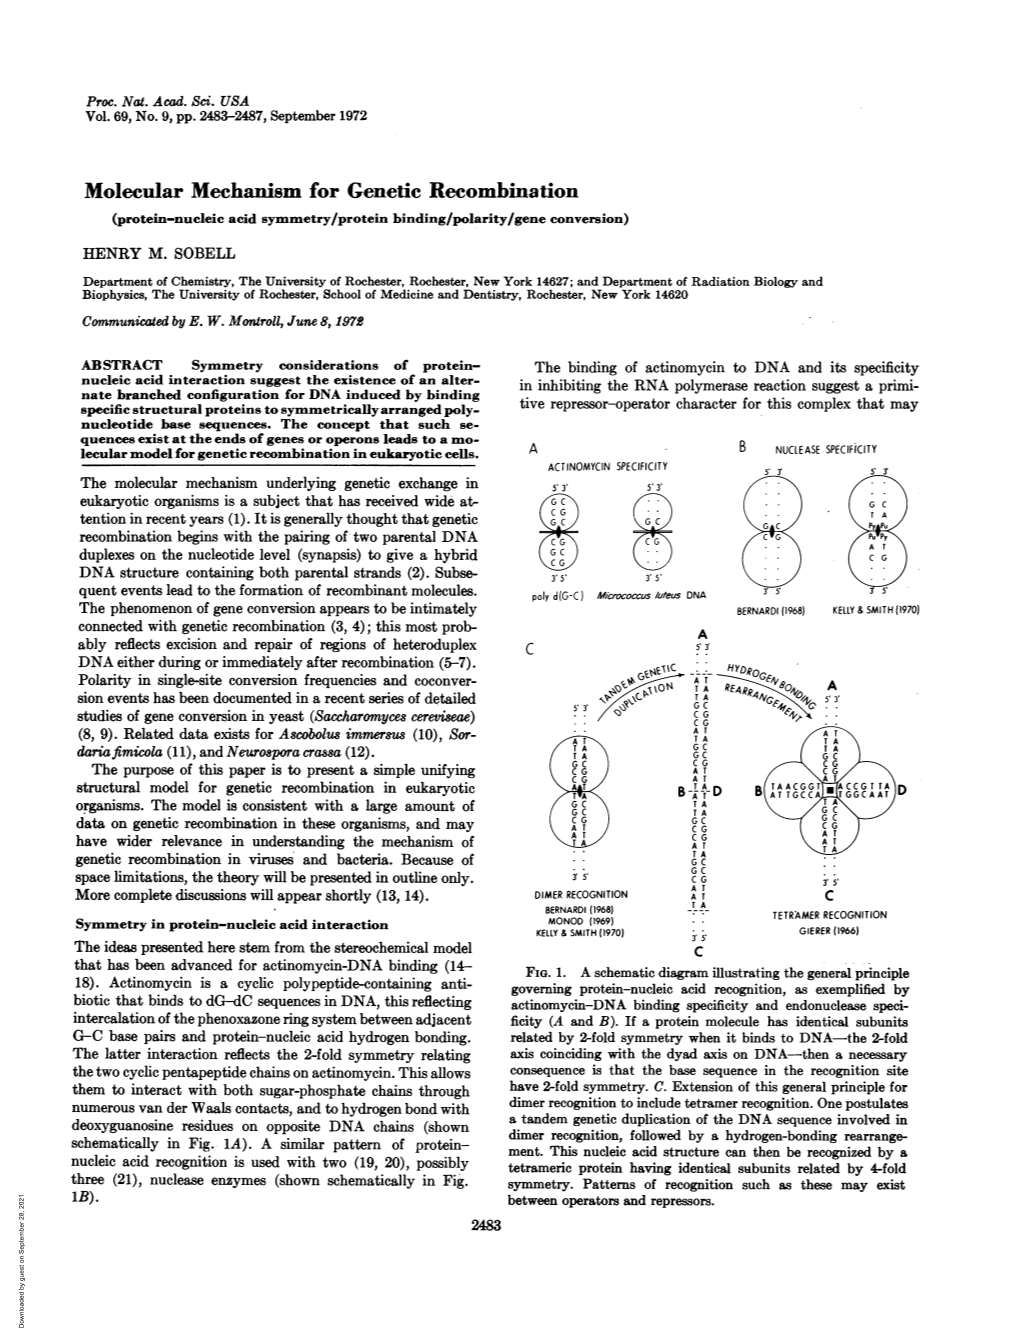 Molecular Mechanism for Genetic Recombination (Protein-Nucleic Acid Symmetry/Protein Binding/Polarity/Gene Conversion) HENRY M